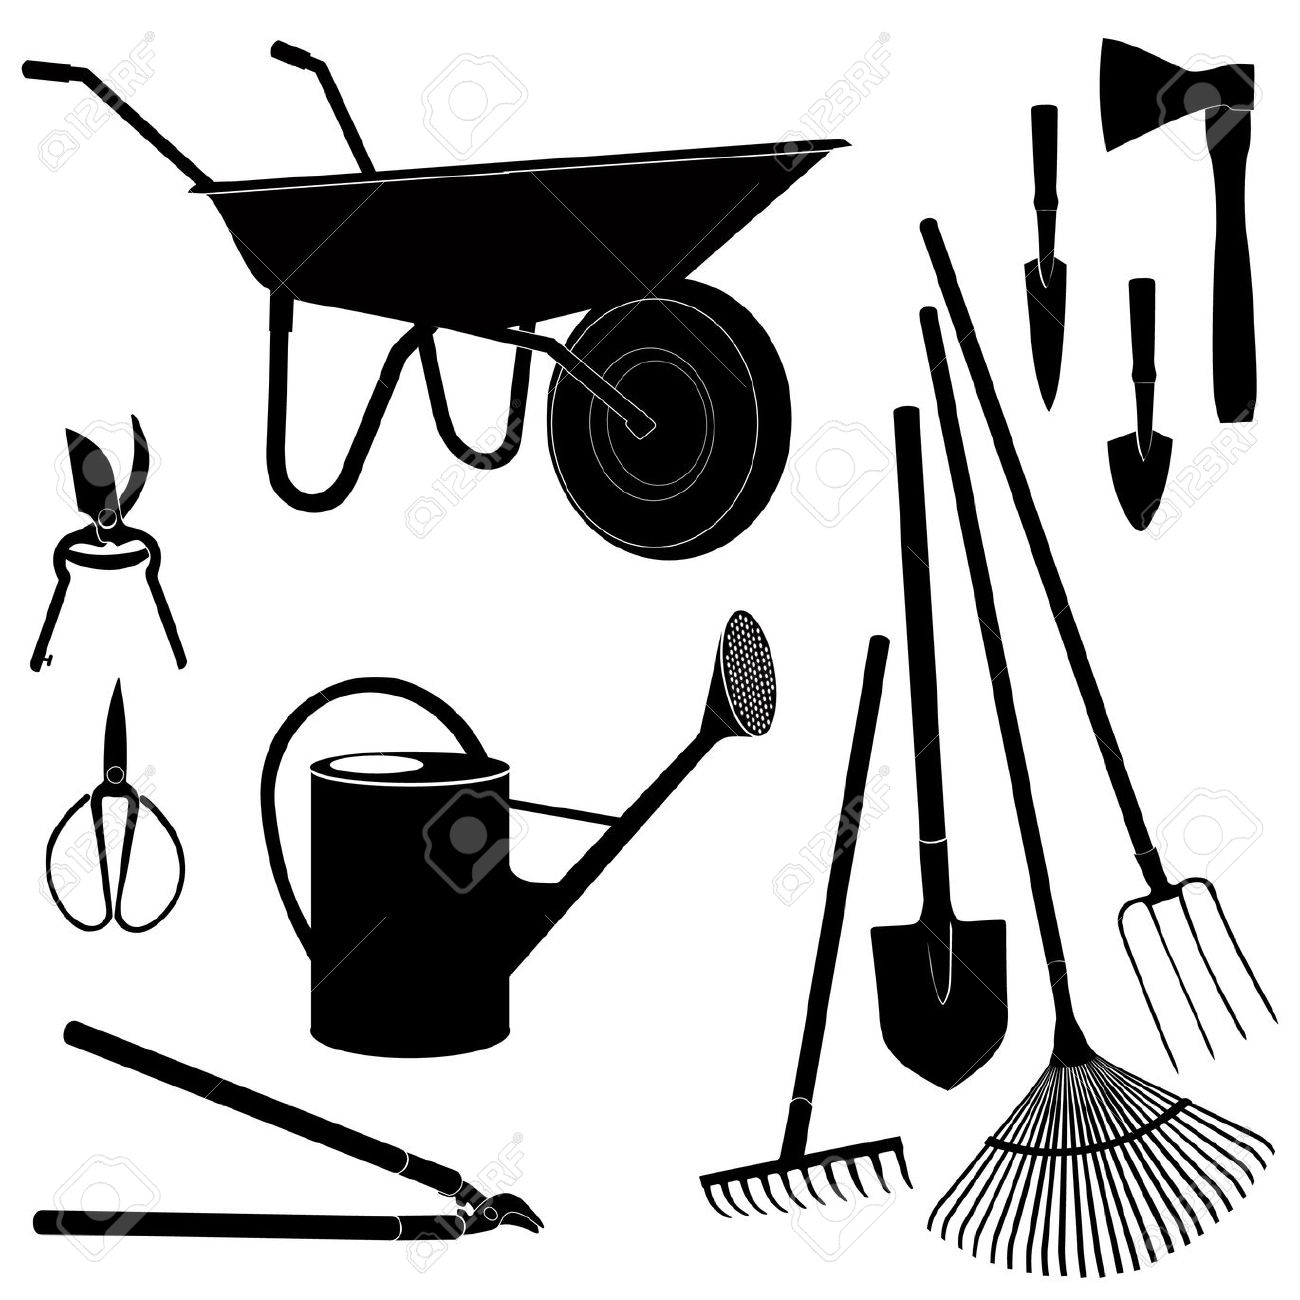 farm tools farm tools are instruments we use in the farm to aid us in ...